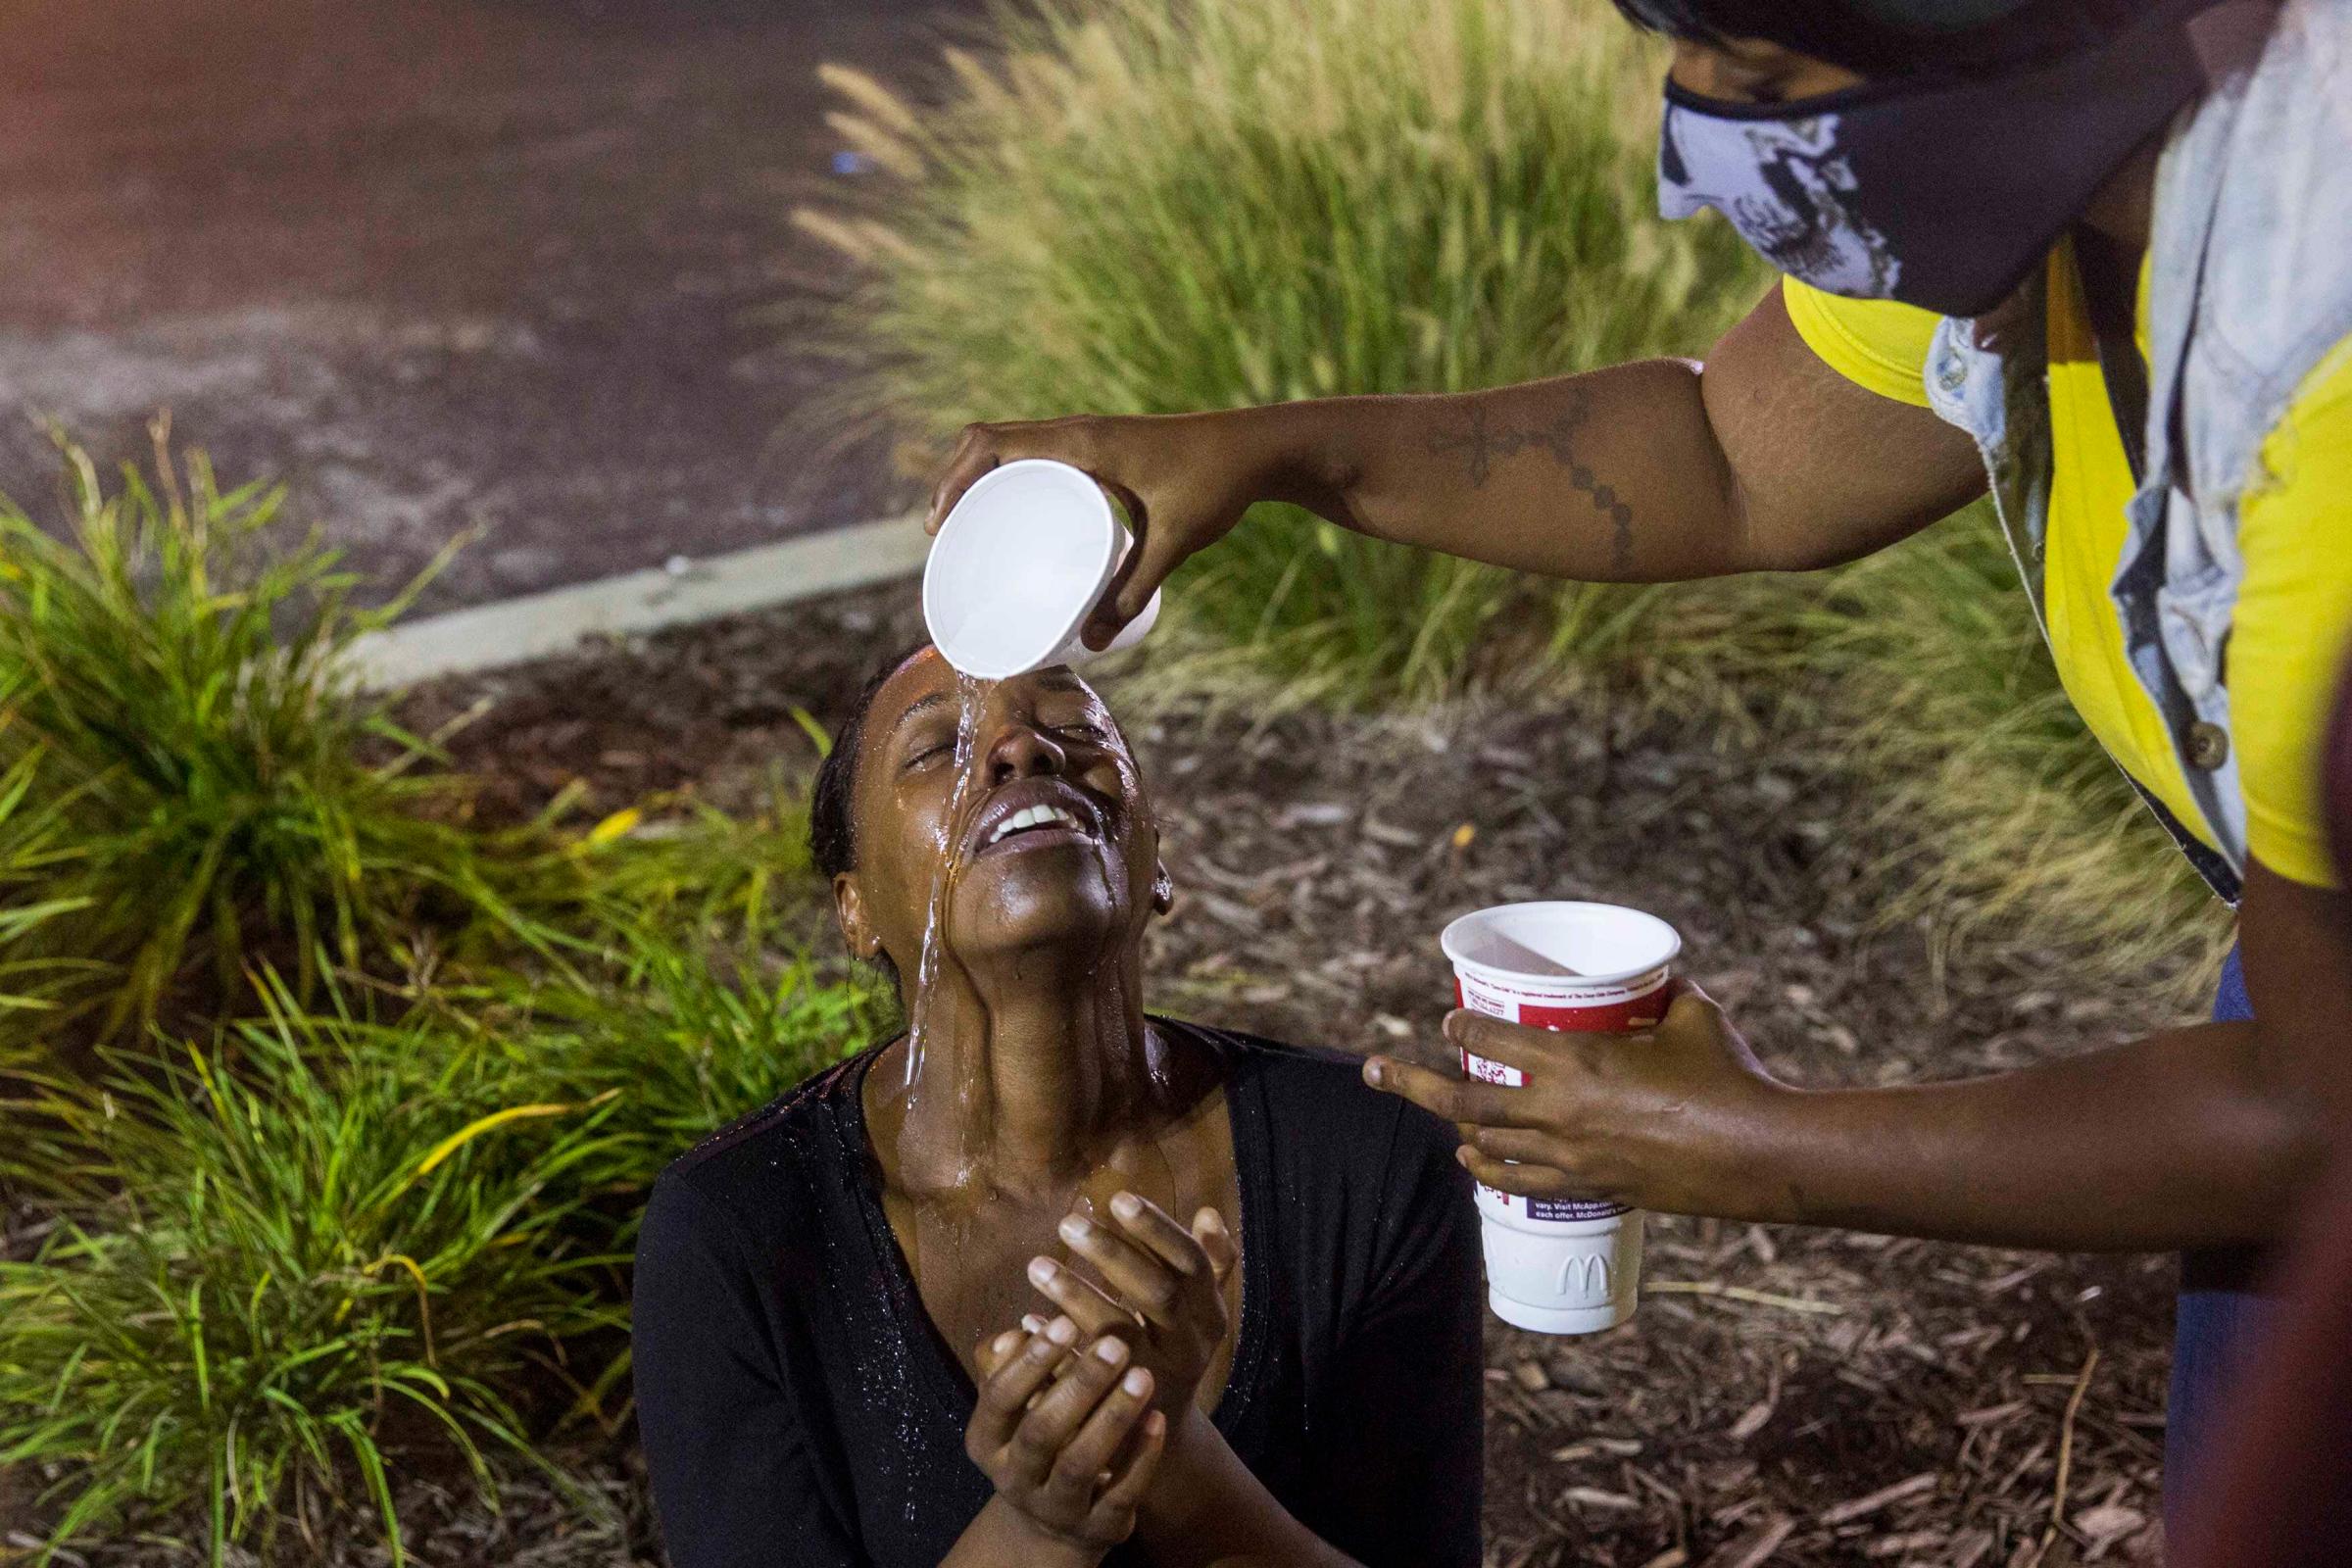 Protesters react to the effects of tear gas which was fired at demonstrators reacting to the shooting of Michael Brown in Ferguson, Missouri